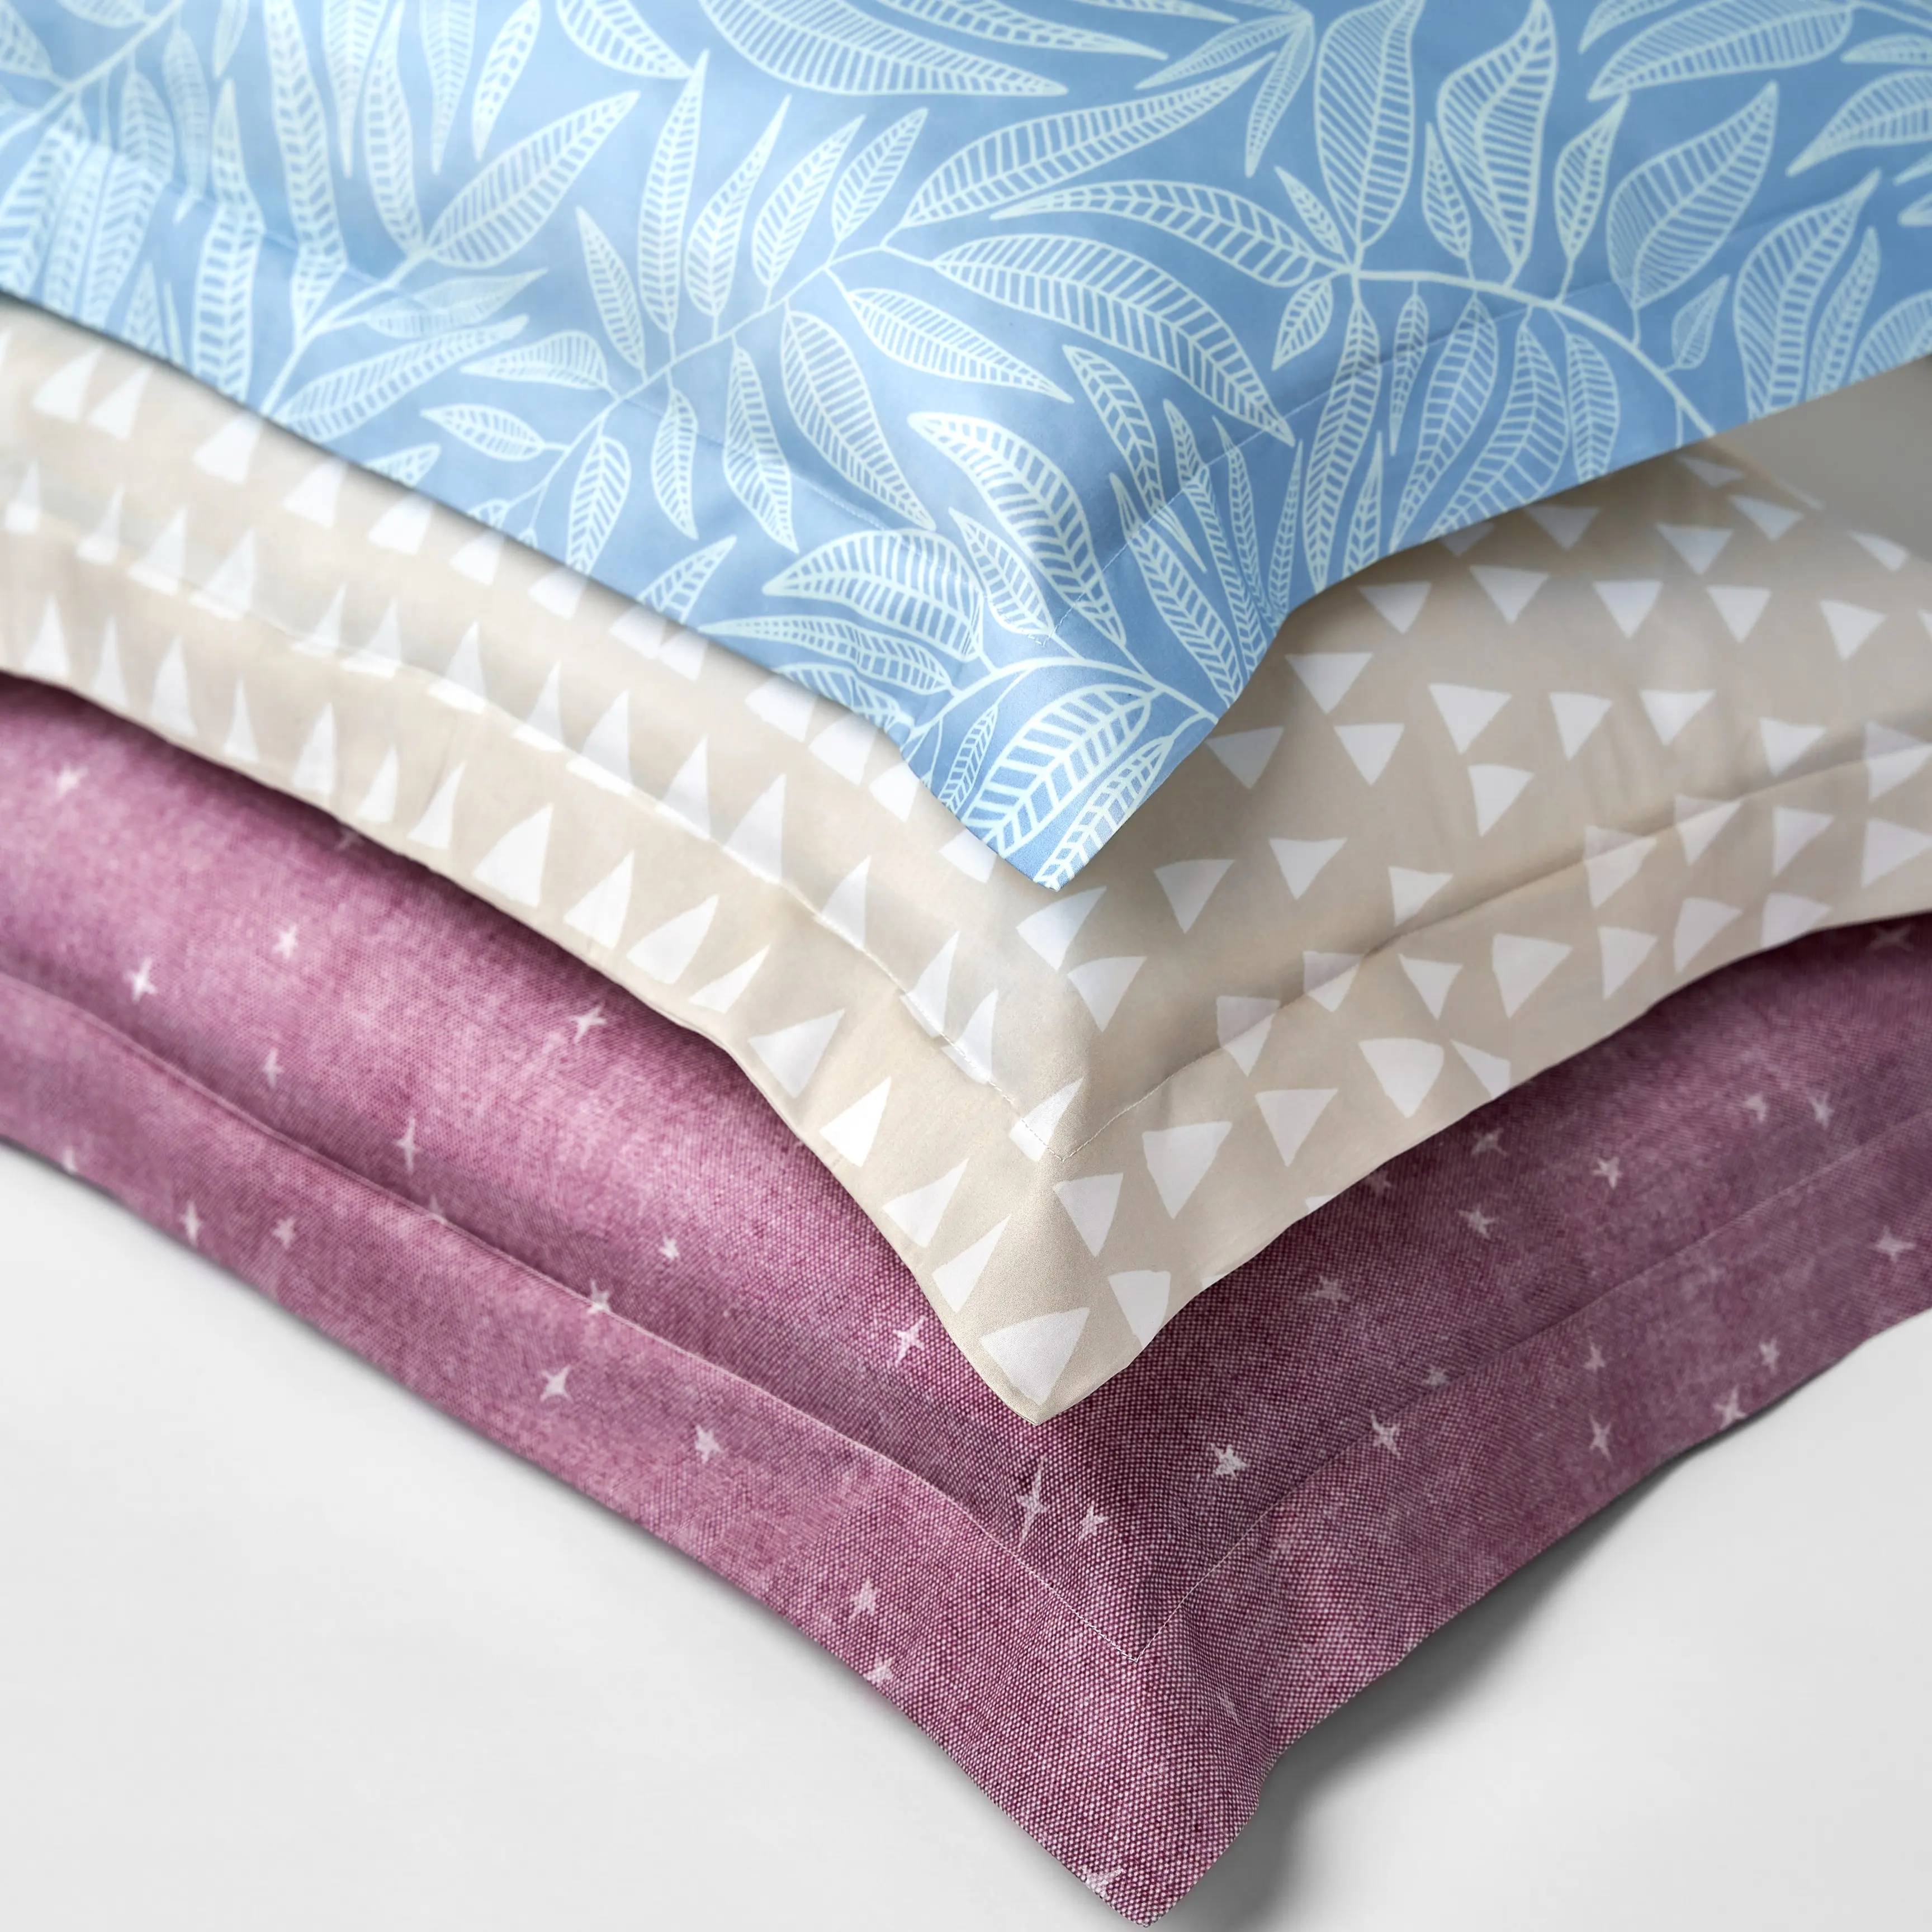 Stack of three flanged pillow shams